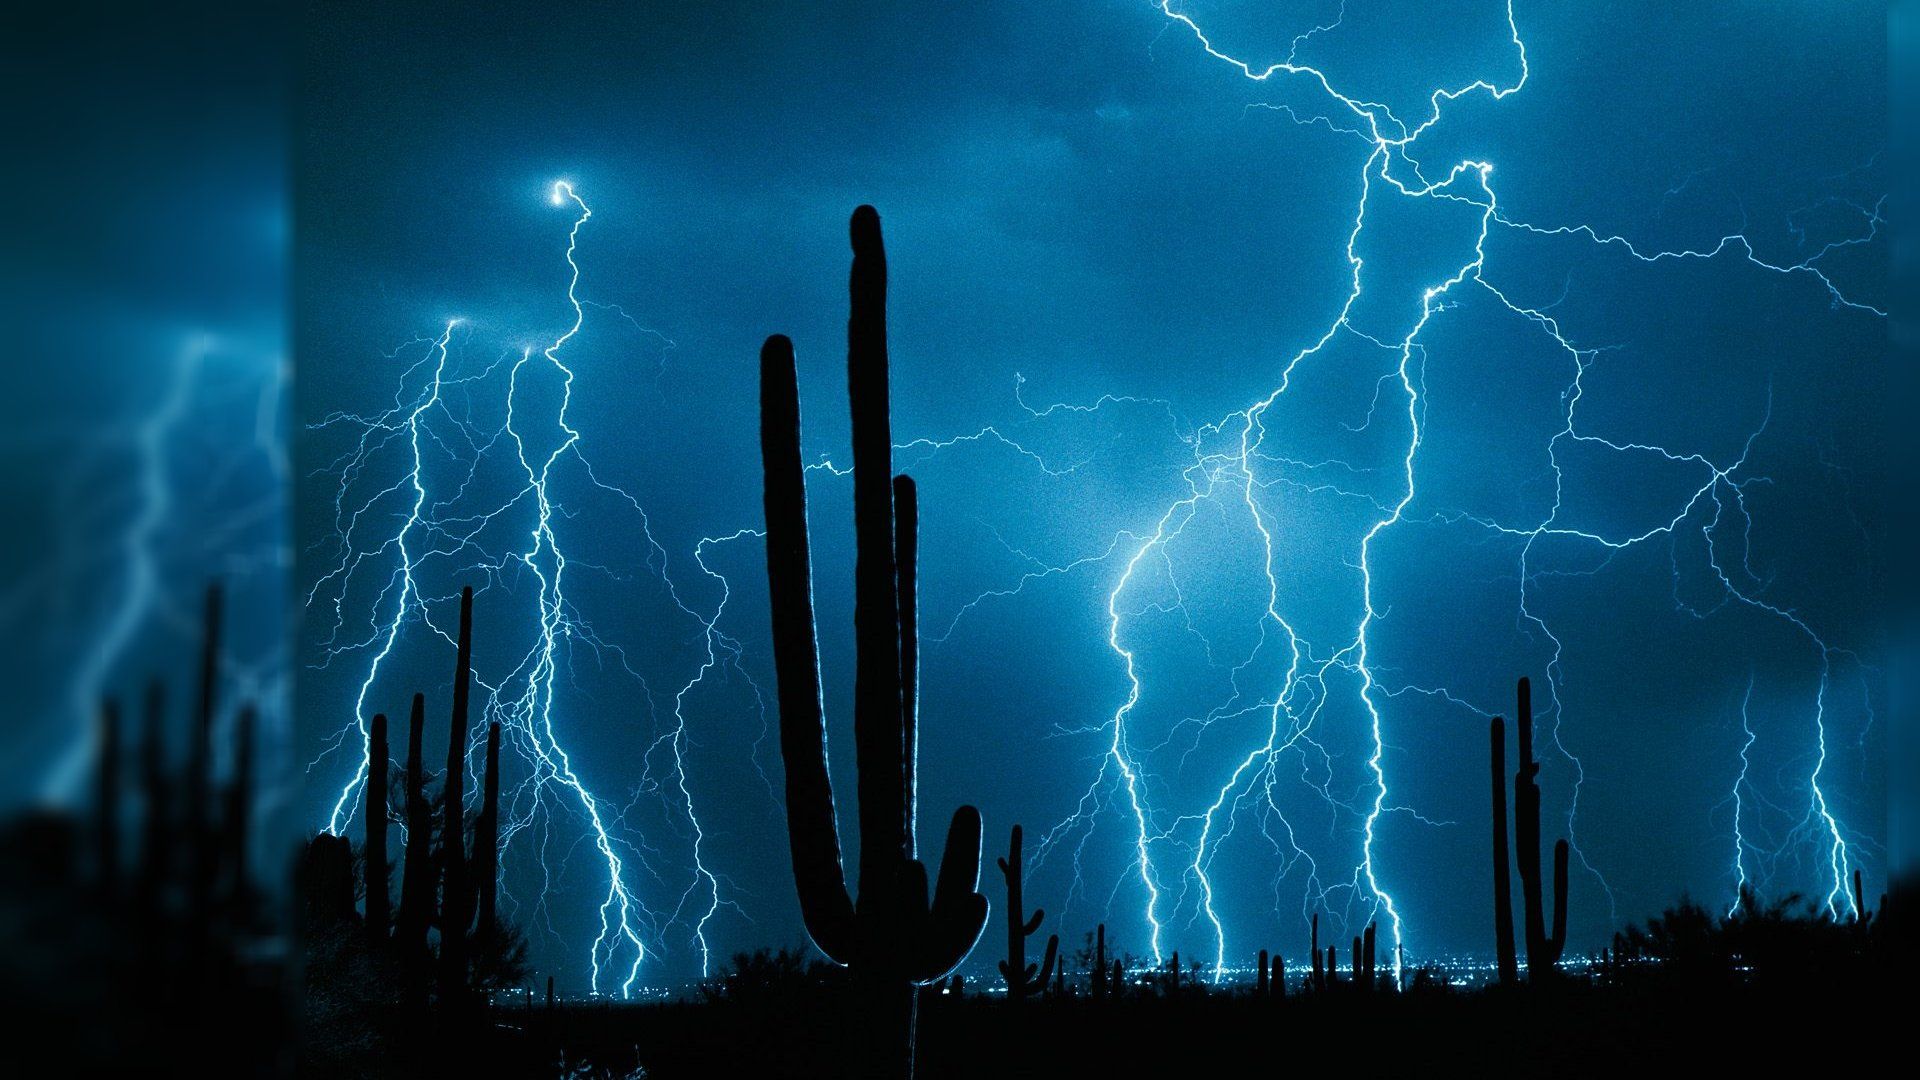 Lightning in the sky over a cactus - Lightning